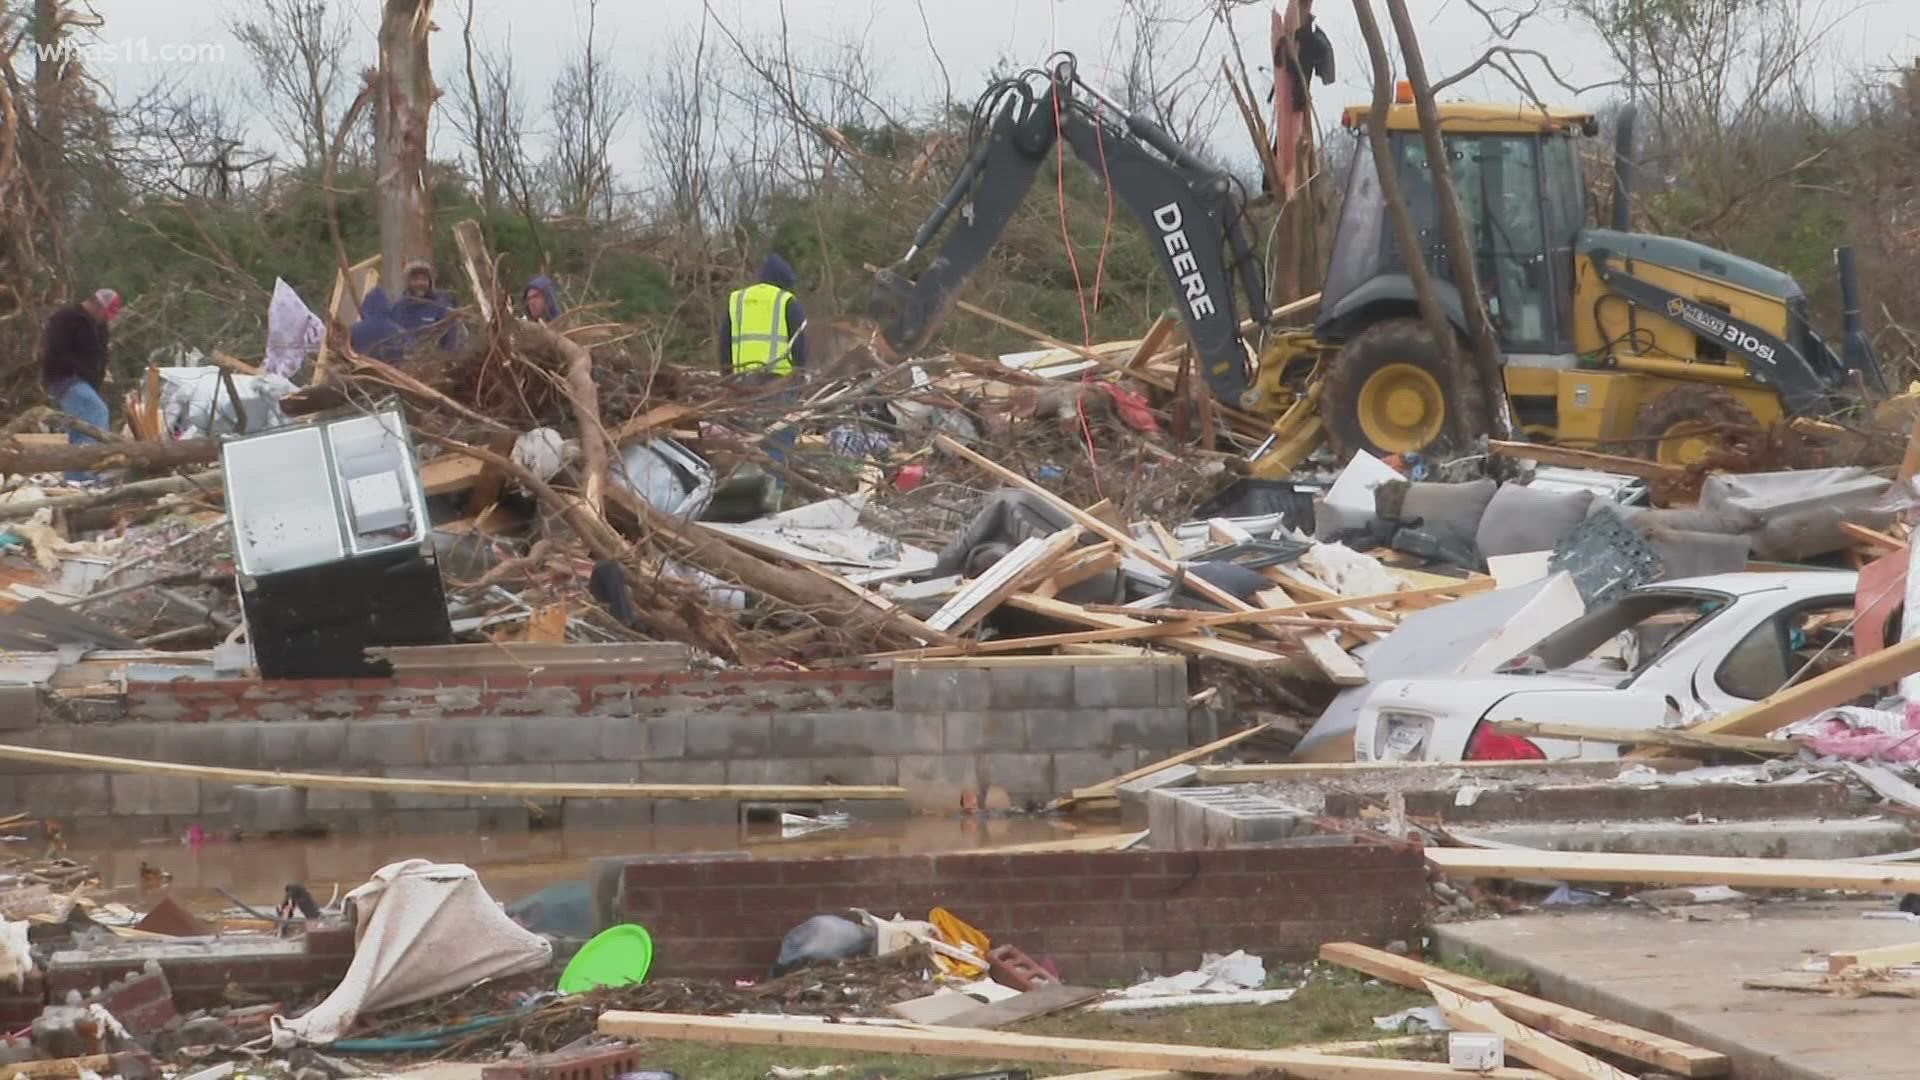 Residents came together to help each other as tornadoes devastated Bowling Green, Kentucky.